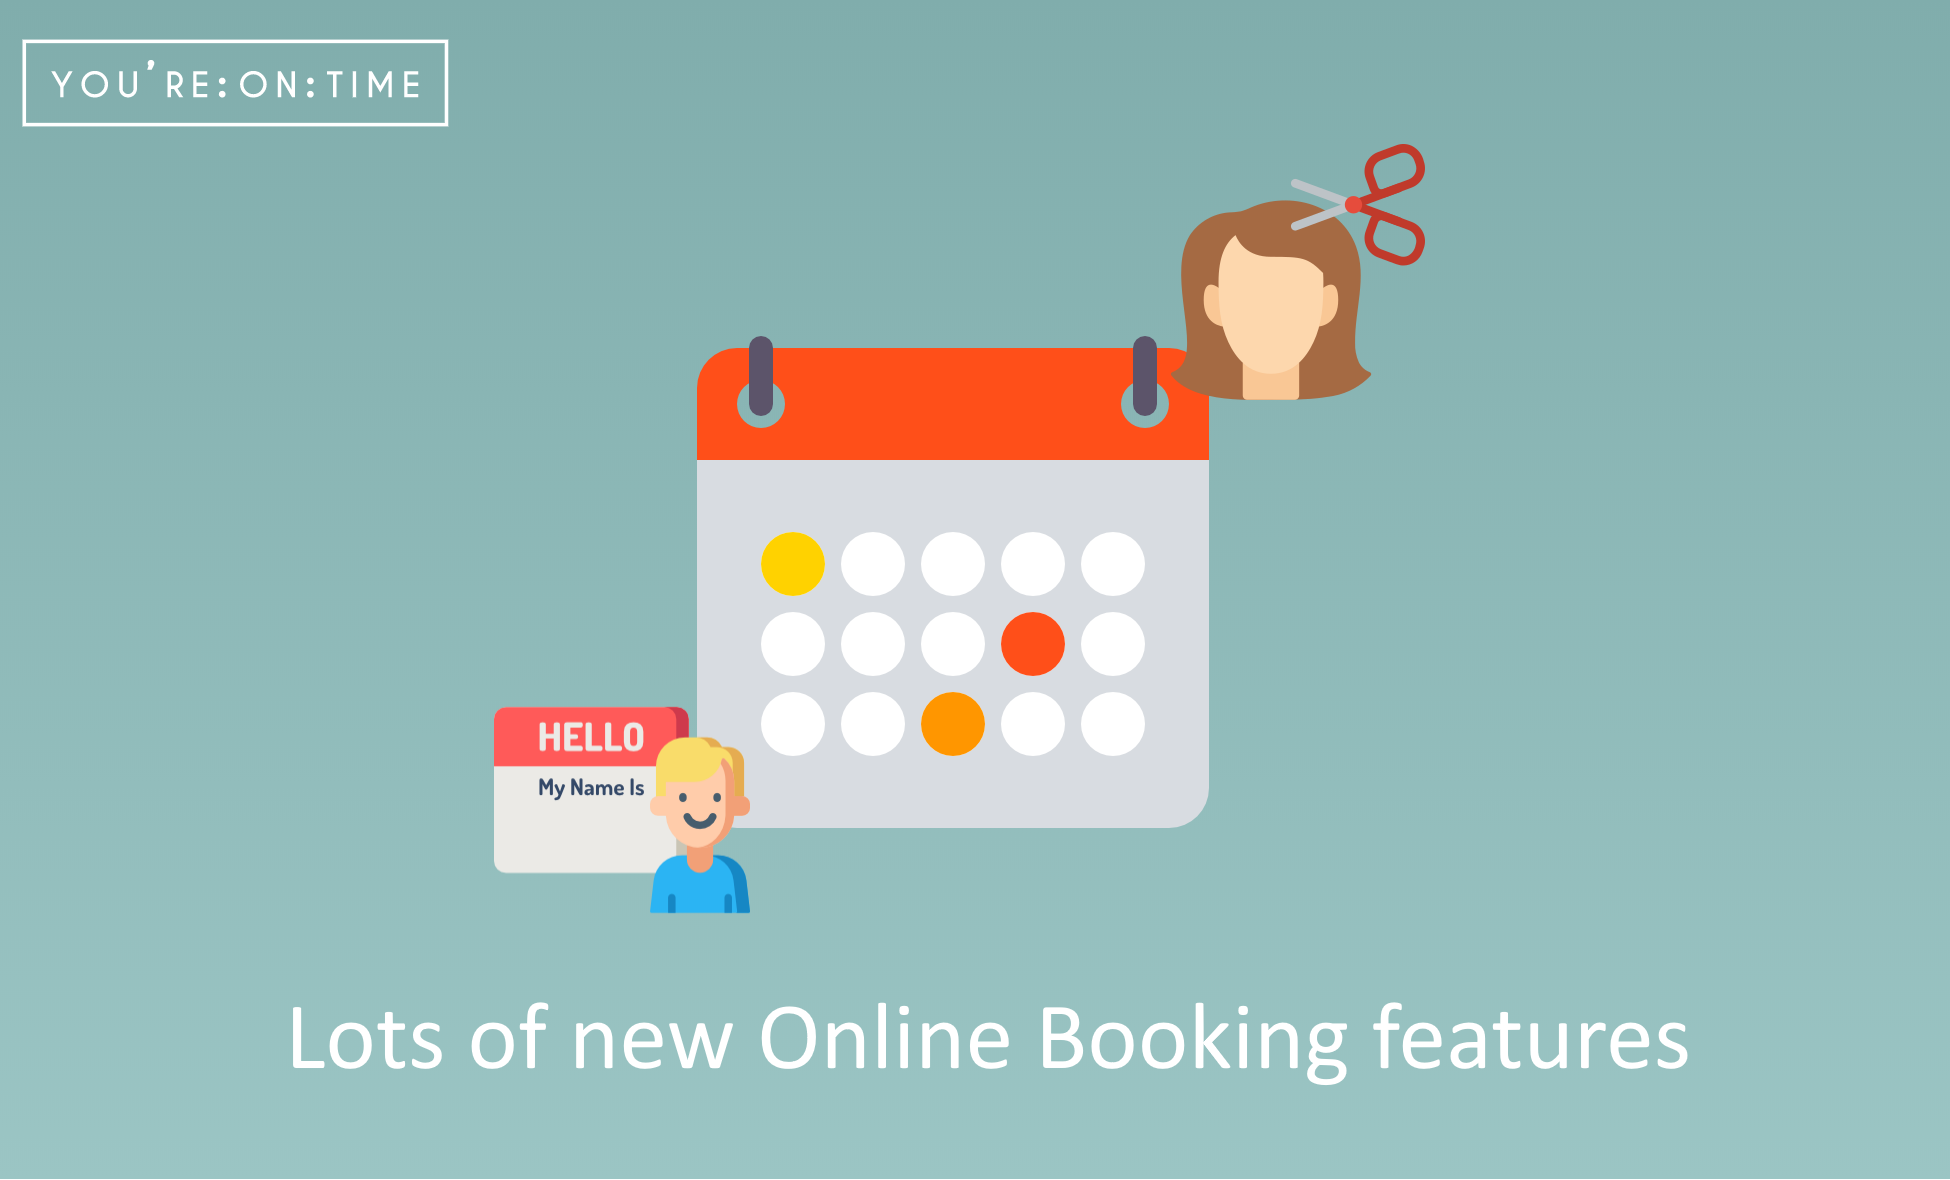 Lots of new Online Booking features